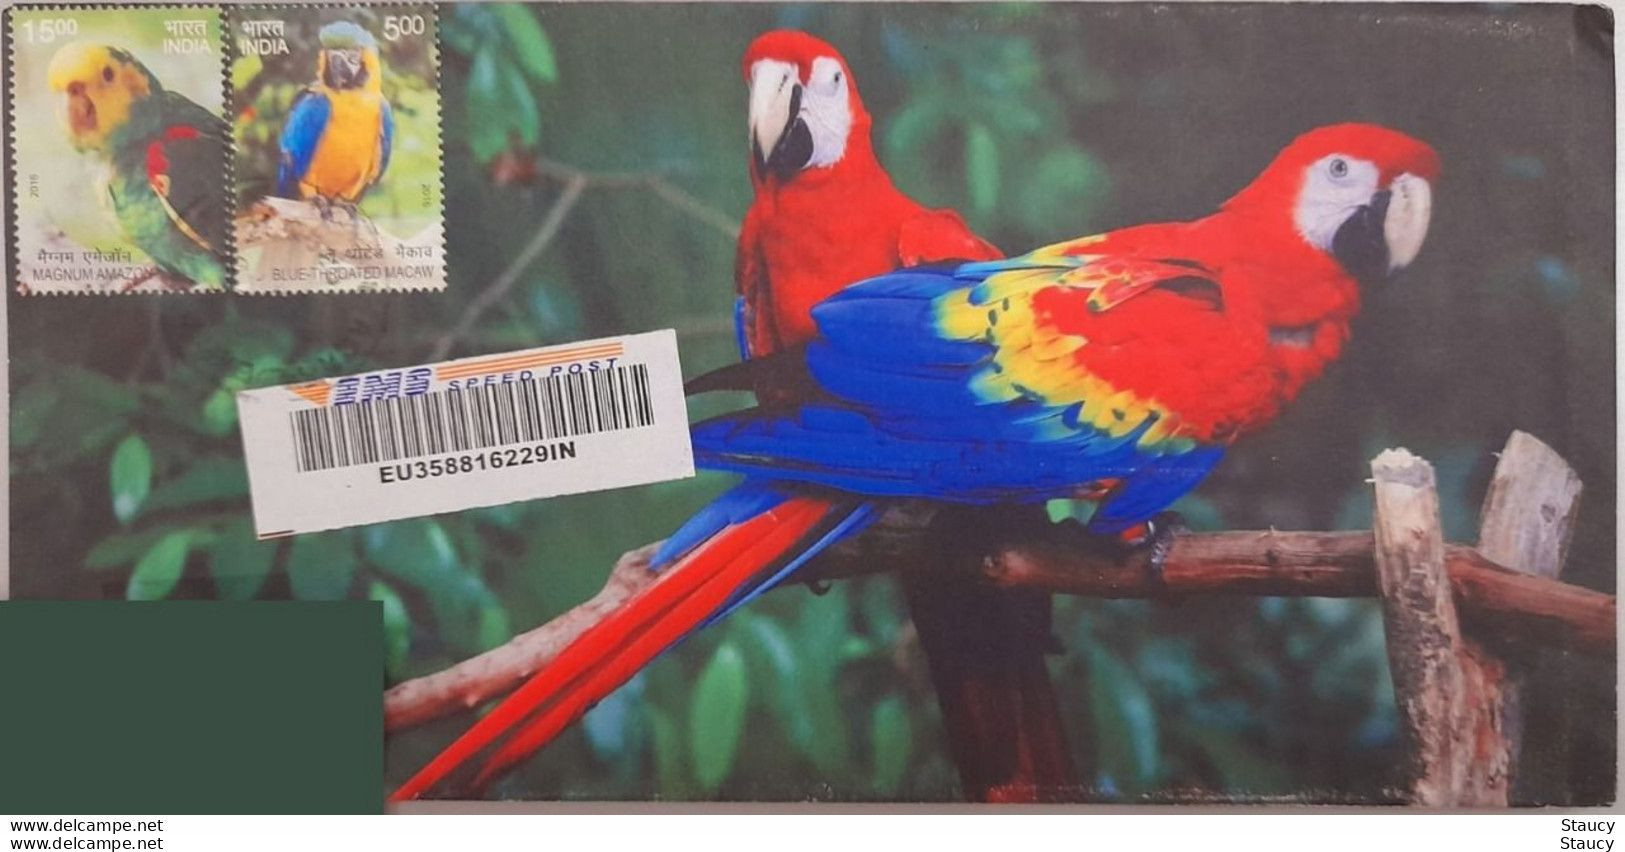 India 2018 Registered Speed Post Cover On Exotic Birds Issue Stamps / Parrots On Stamp Postally / Commercially Used - Coucous, Touracos